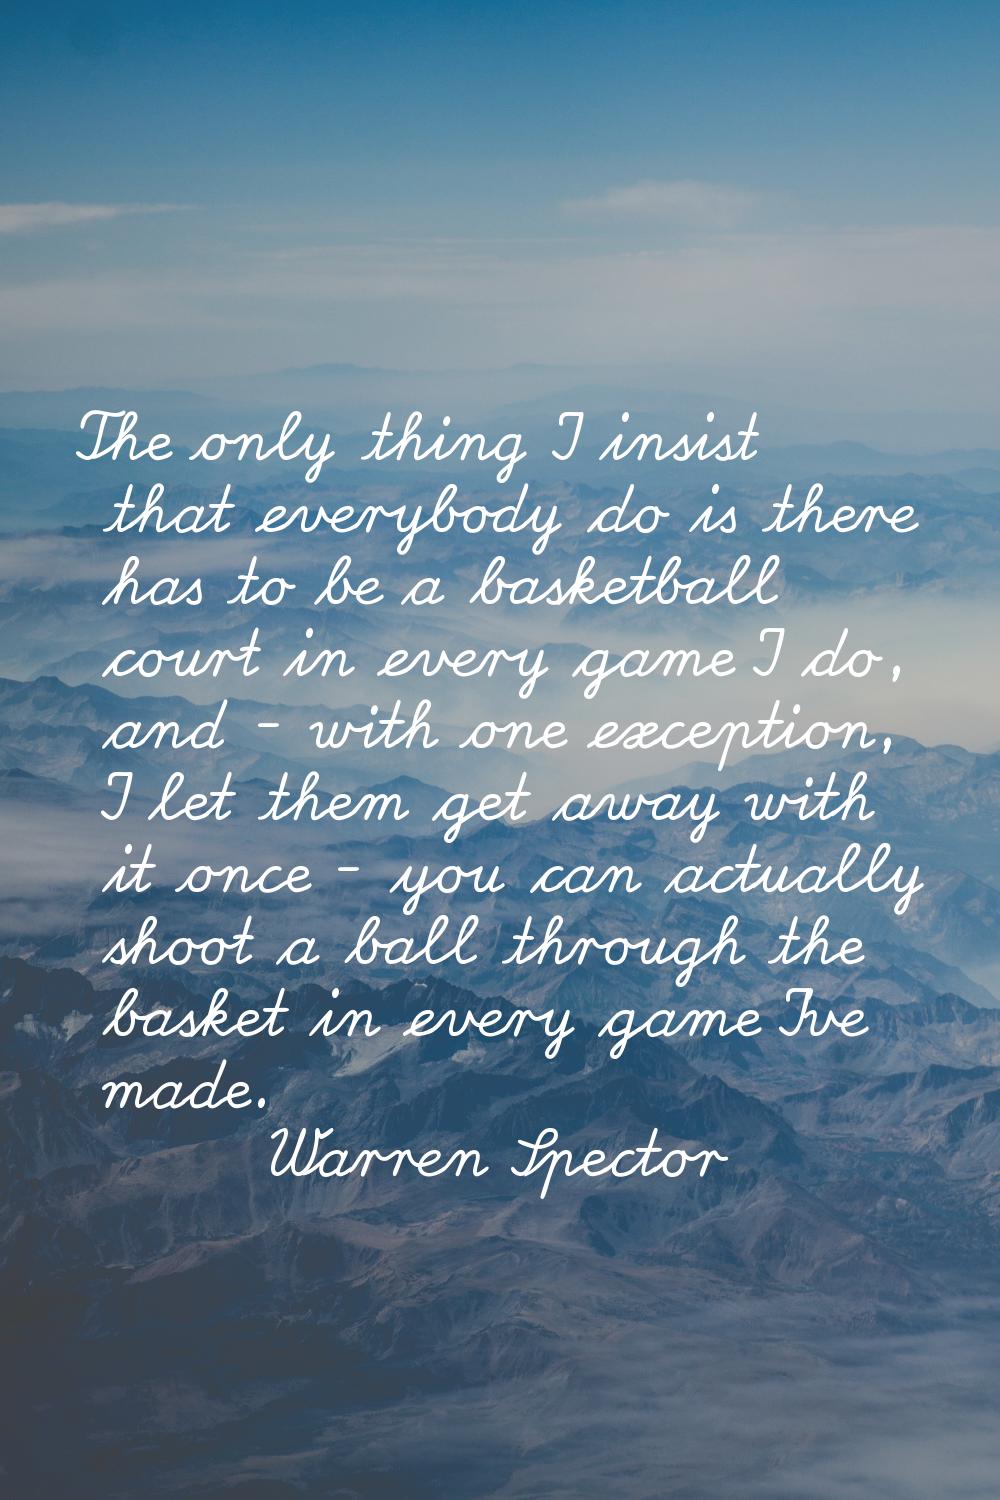 The only thing I insist that everybody do is there has to be a basketball court in every game I do,